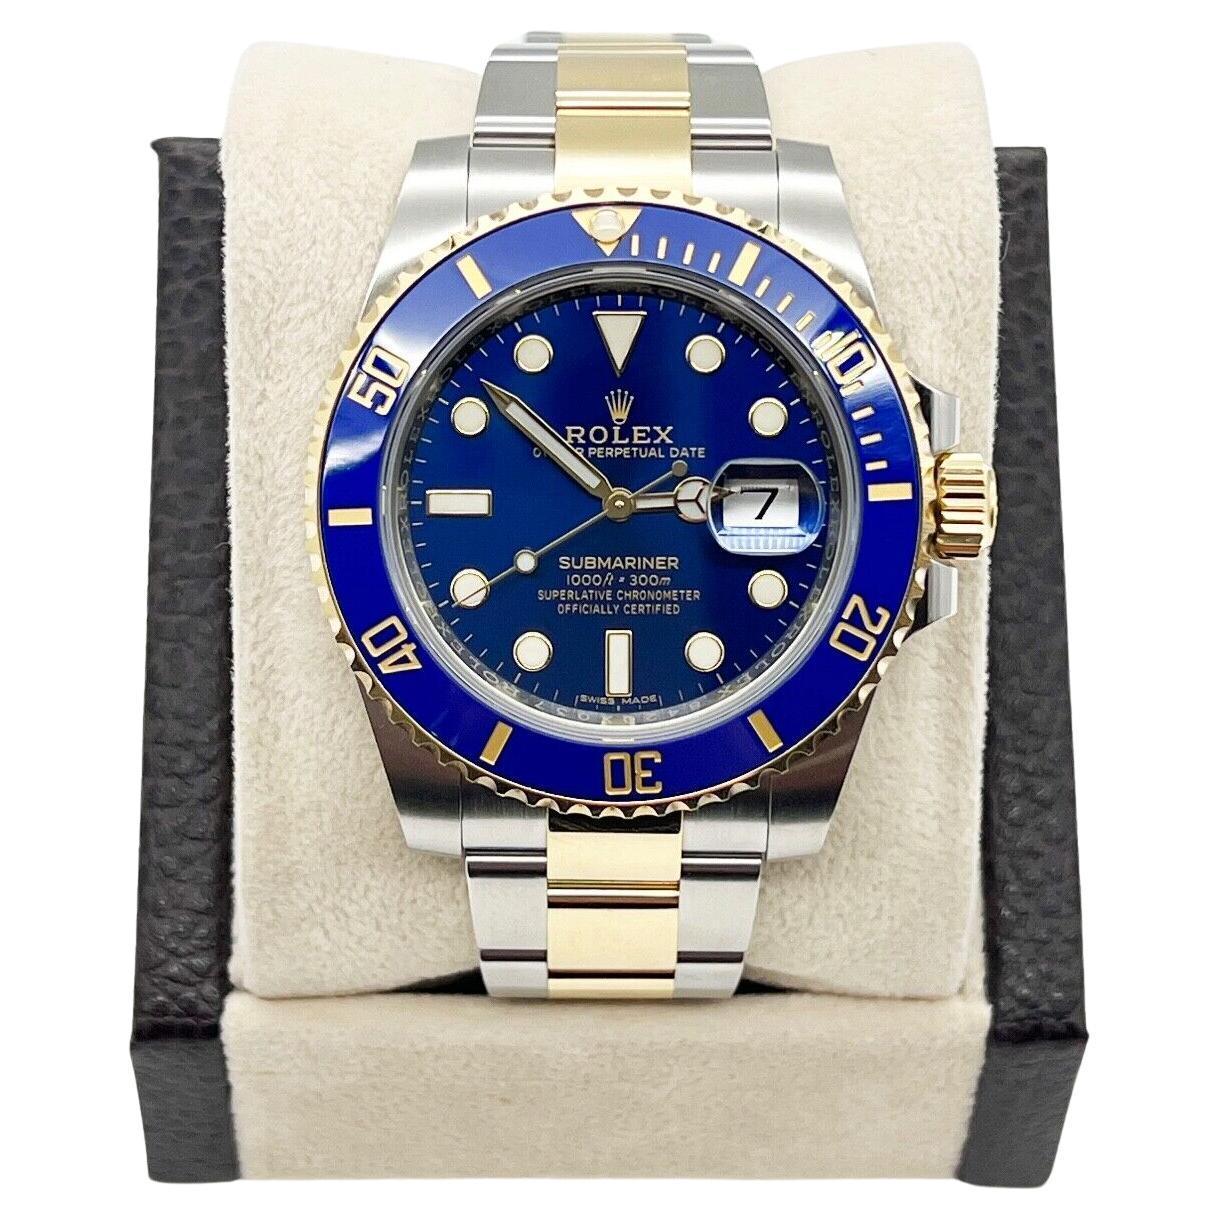 2020 Rolex Submariner 116613 Blue Ceramic 18K Yellow Gold Stainless Box Paper For Sale